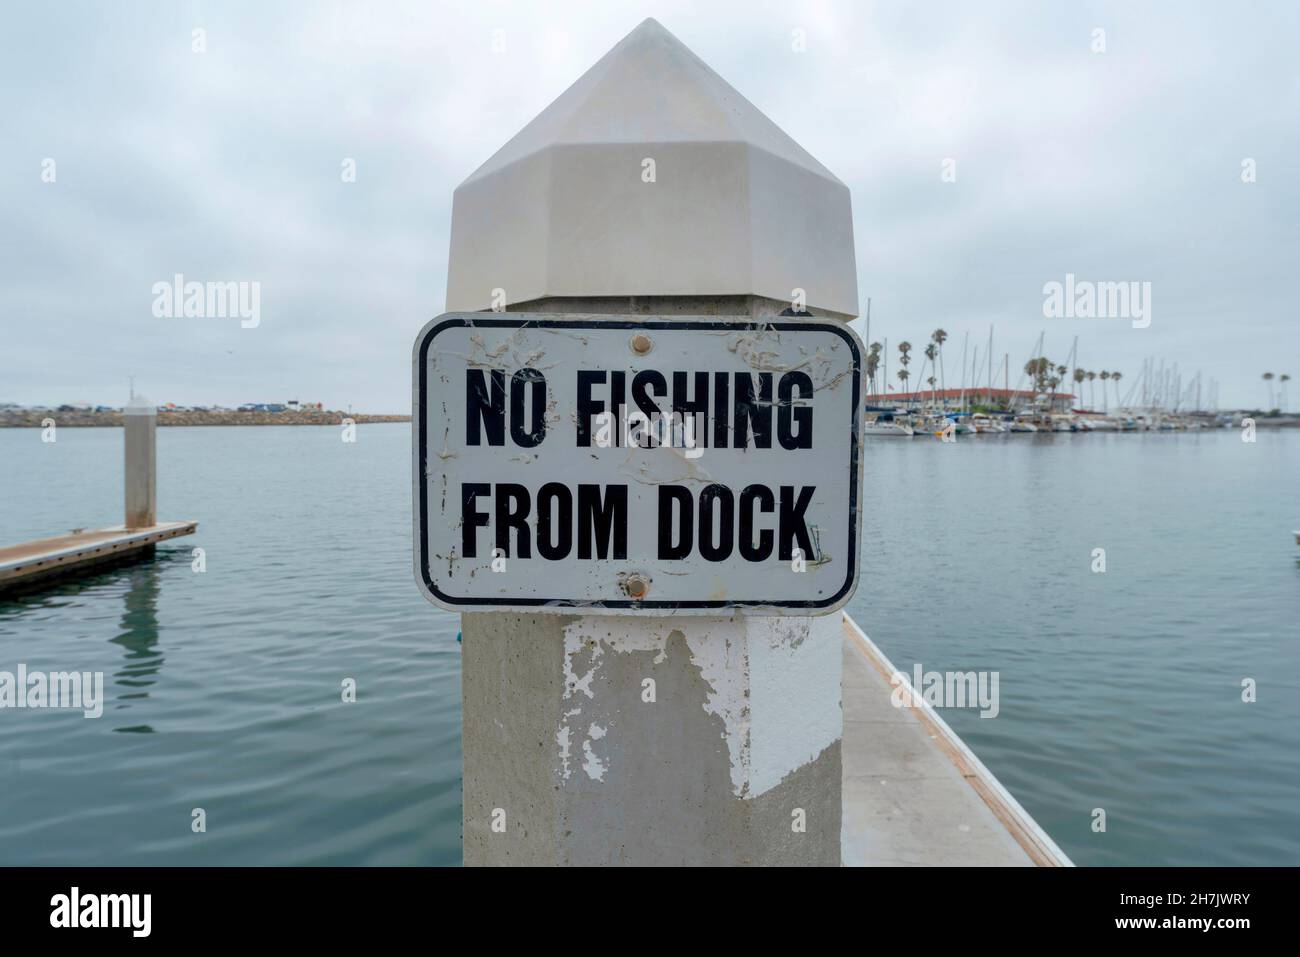 https://c8.alamy.com/comp/2H7JWRY/no-fishing-from-dock-old-signage-at-oceanside-california-close-up-of-a-signage-on-a-post-against-the-view-of-the-water-and-harbor-at-the-back-2H7JWRY.jpg